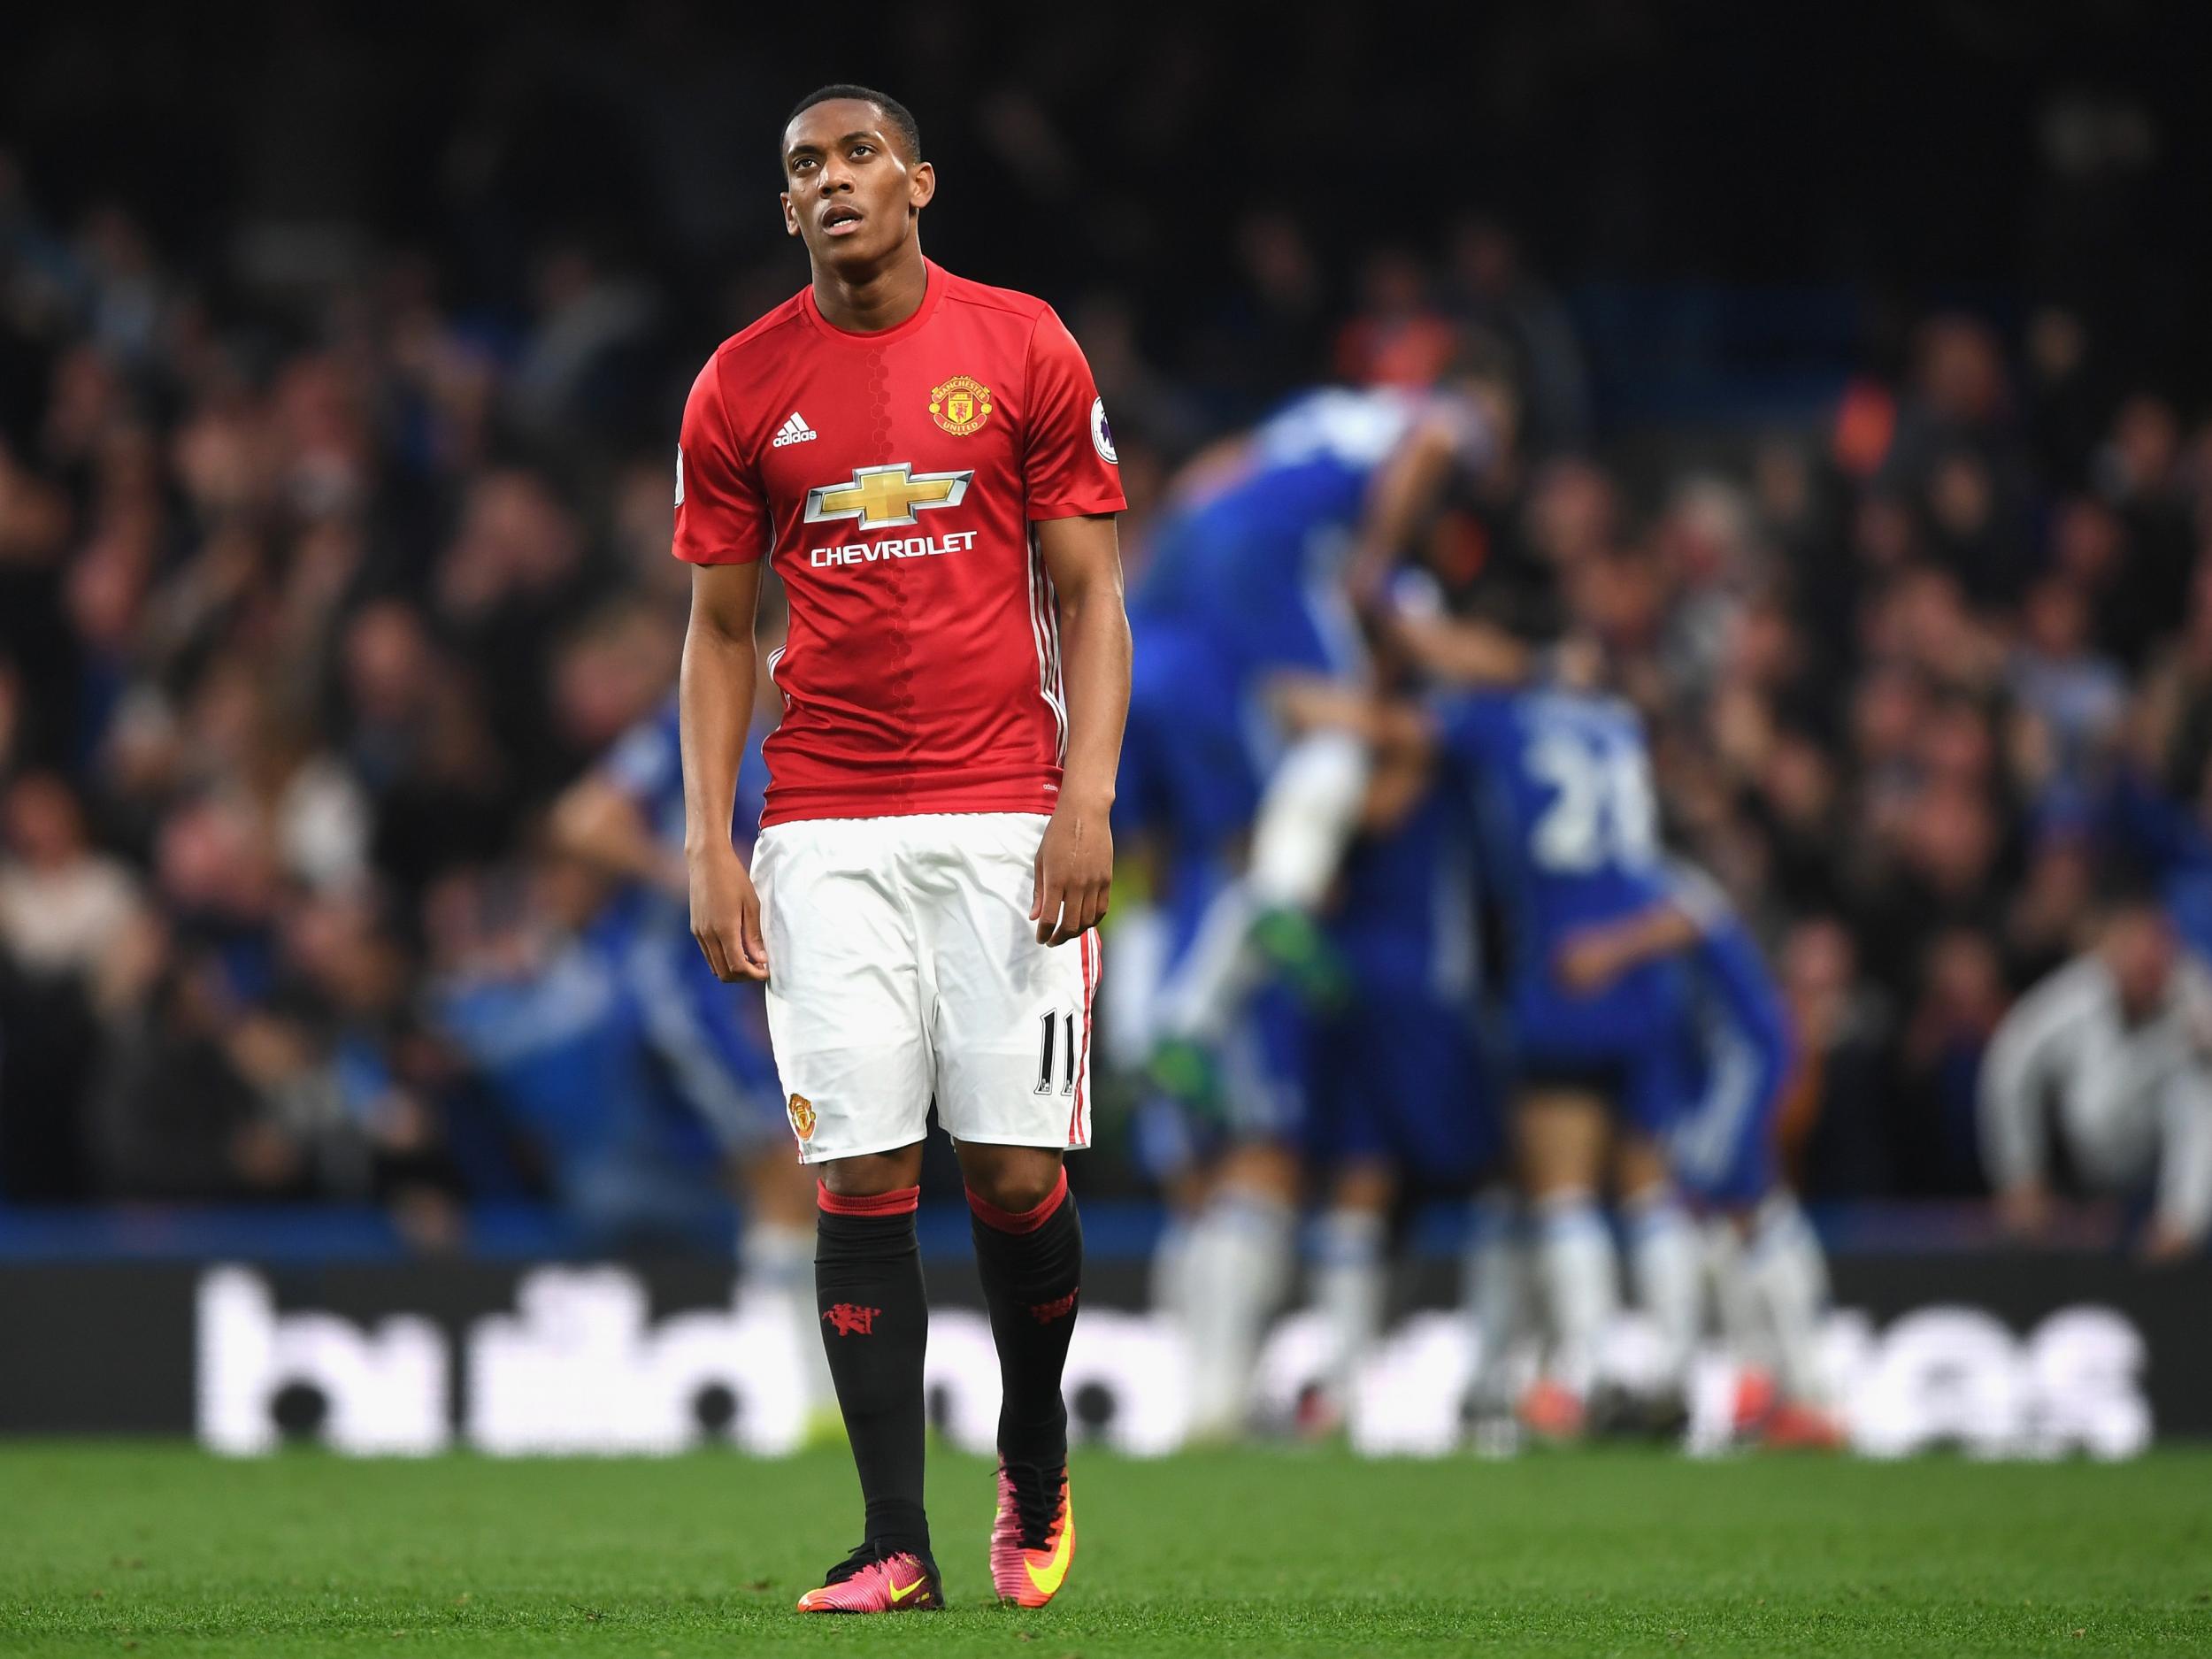 Martial has only managed two goals so far this season - and one was a penalty